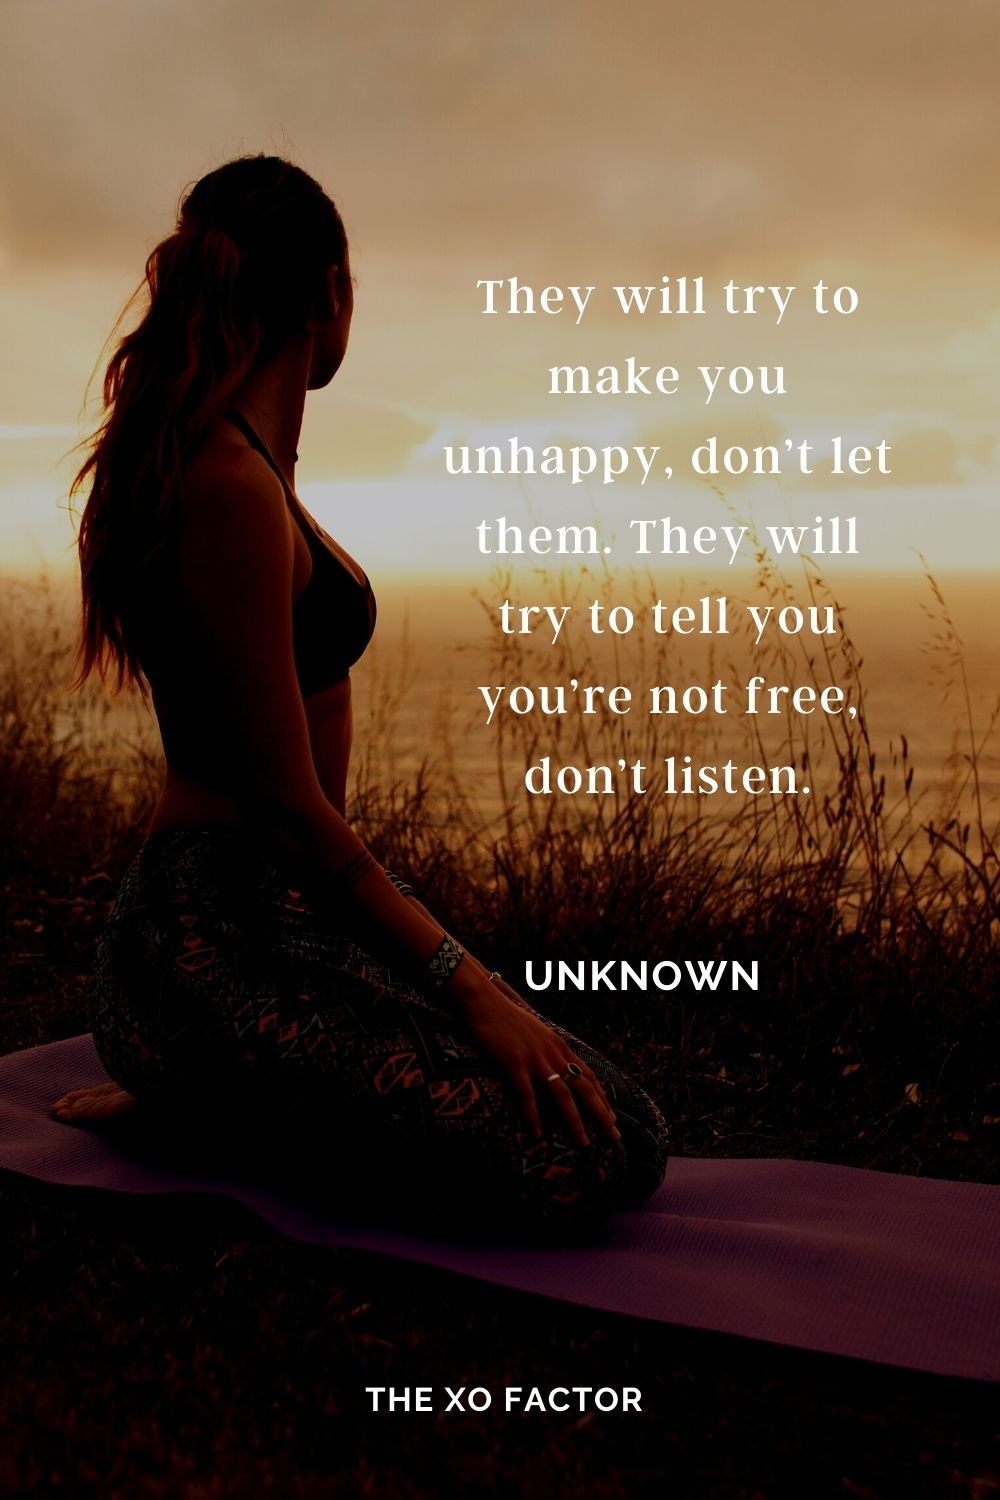 They will try to make you unhappy, don’t let them. They will try to tell you you’re not free, don’t listen. Unknown